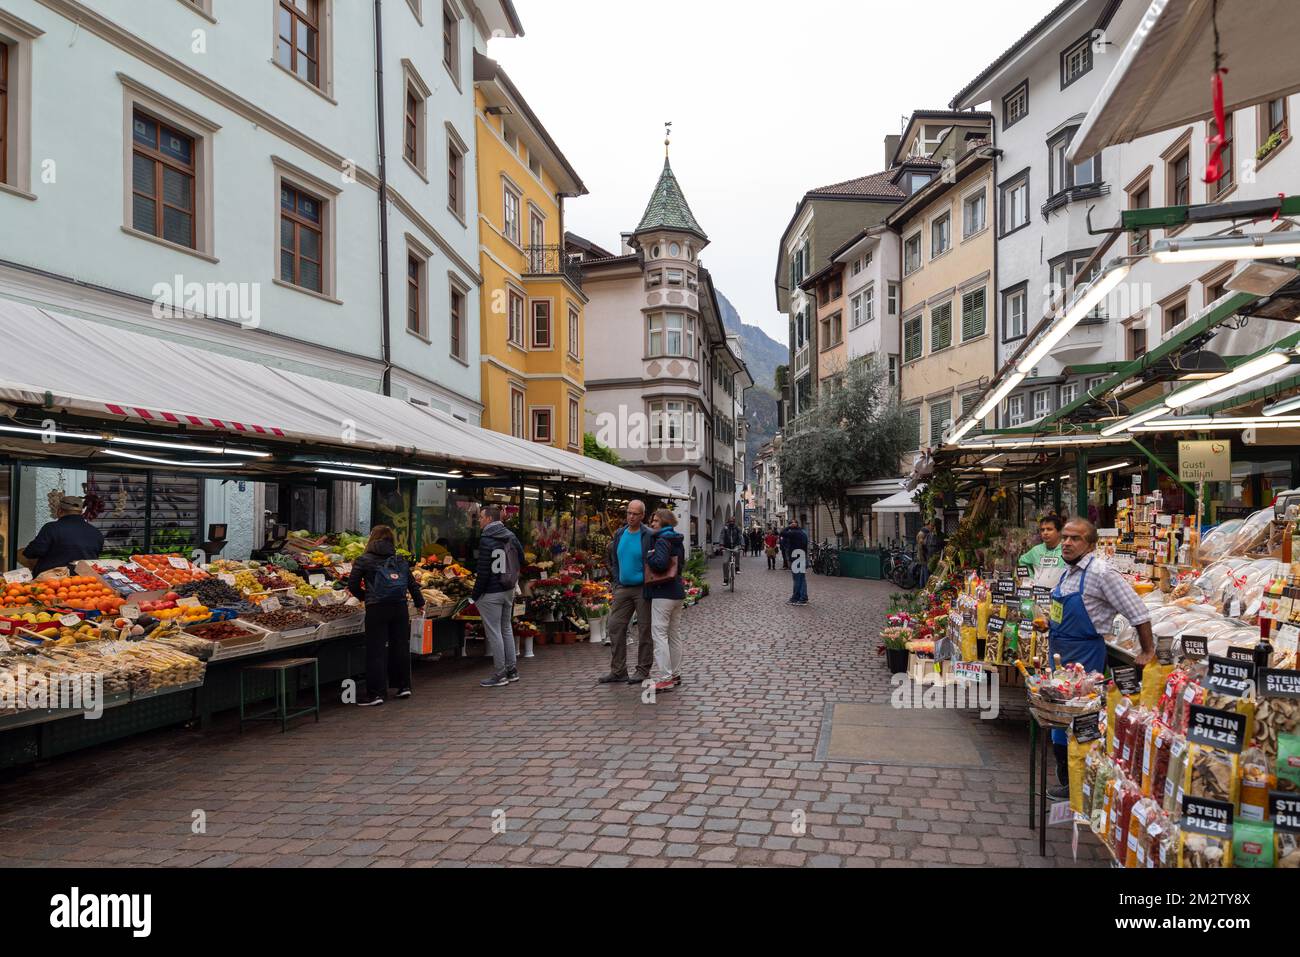 Fruit and vegetable market in the Piazza delle Erbe square, Bolzano, Italy Stock Photo